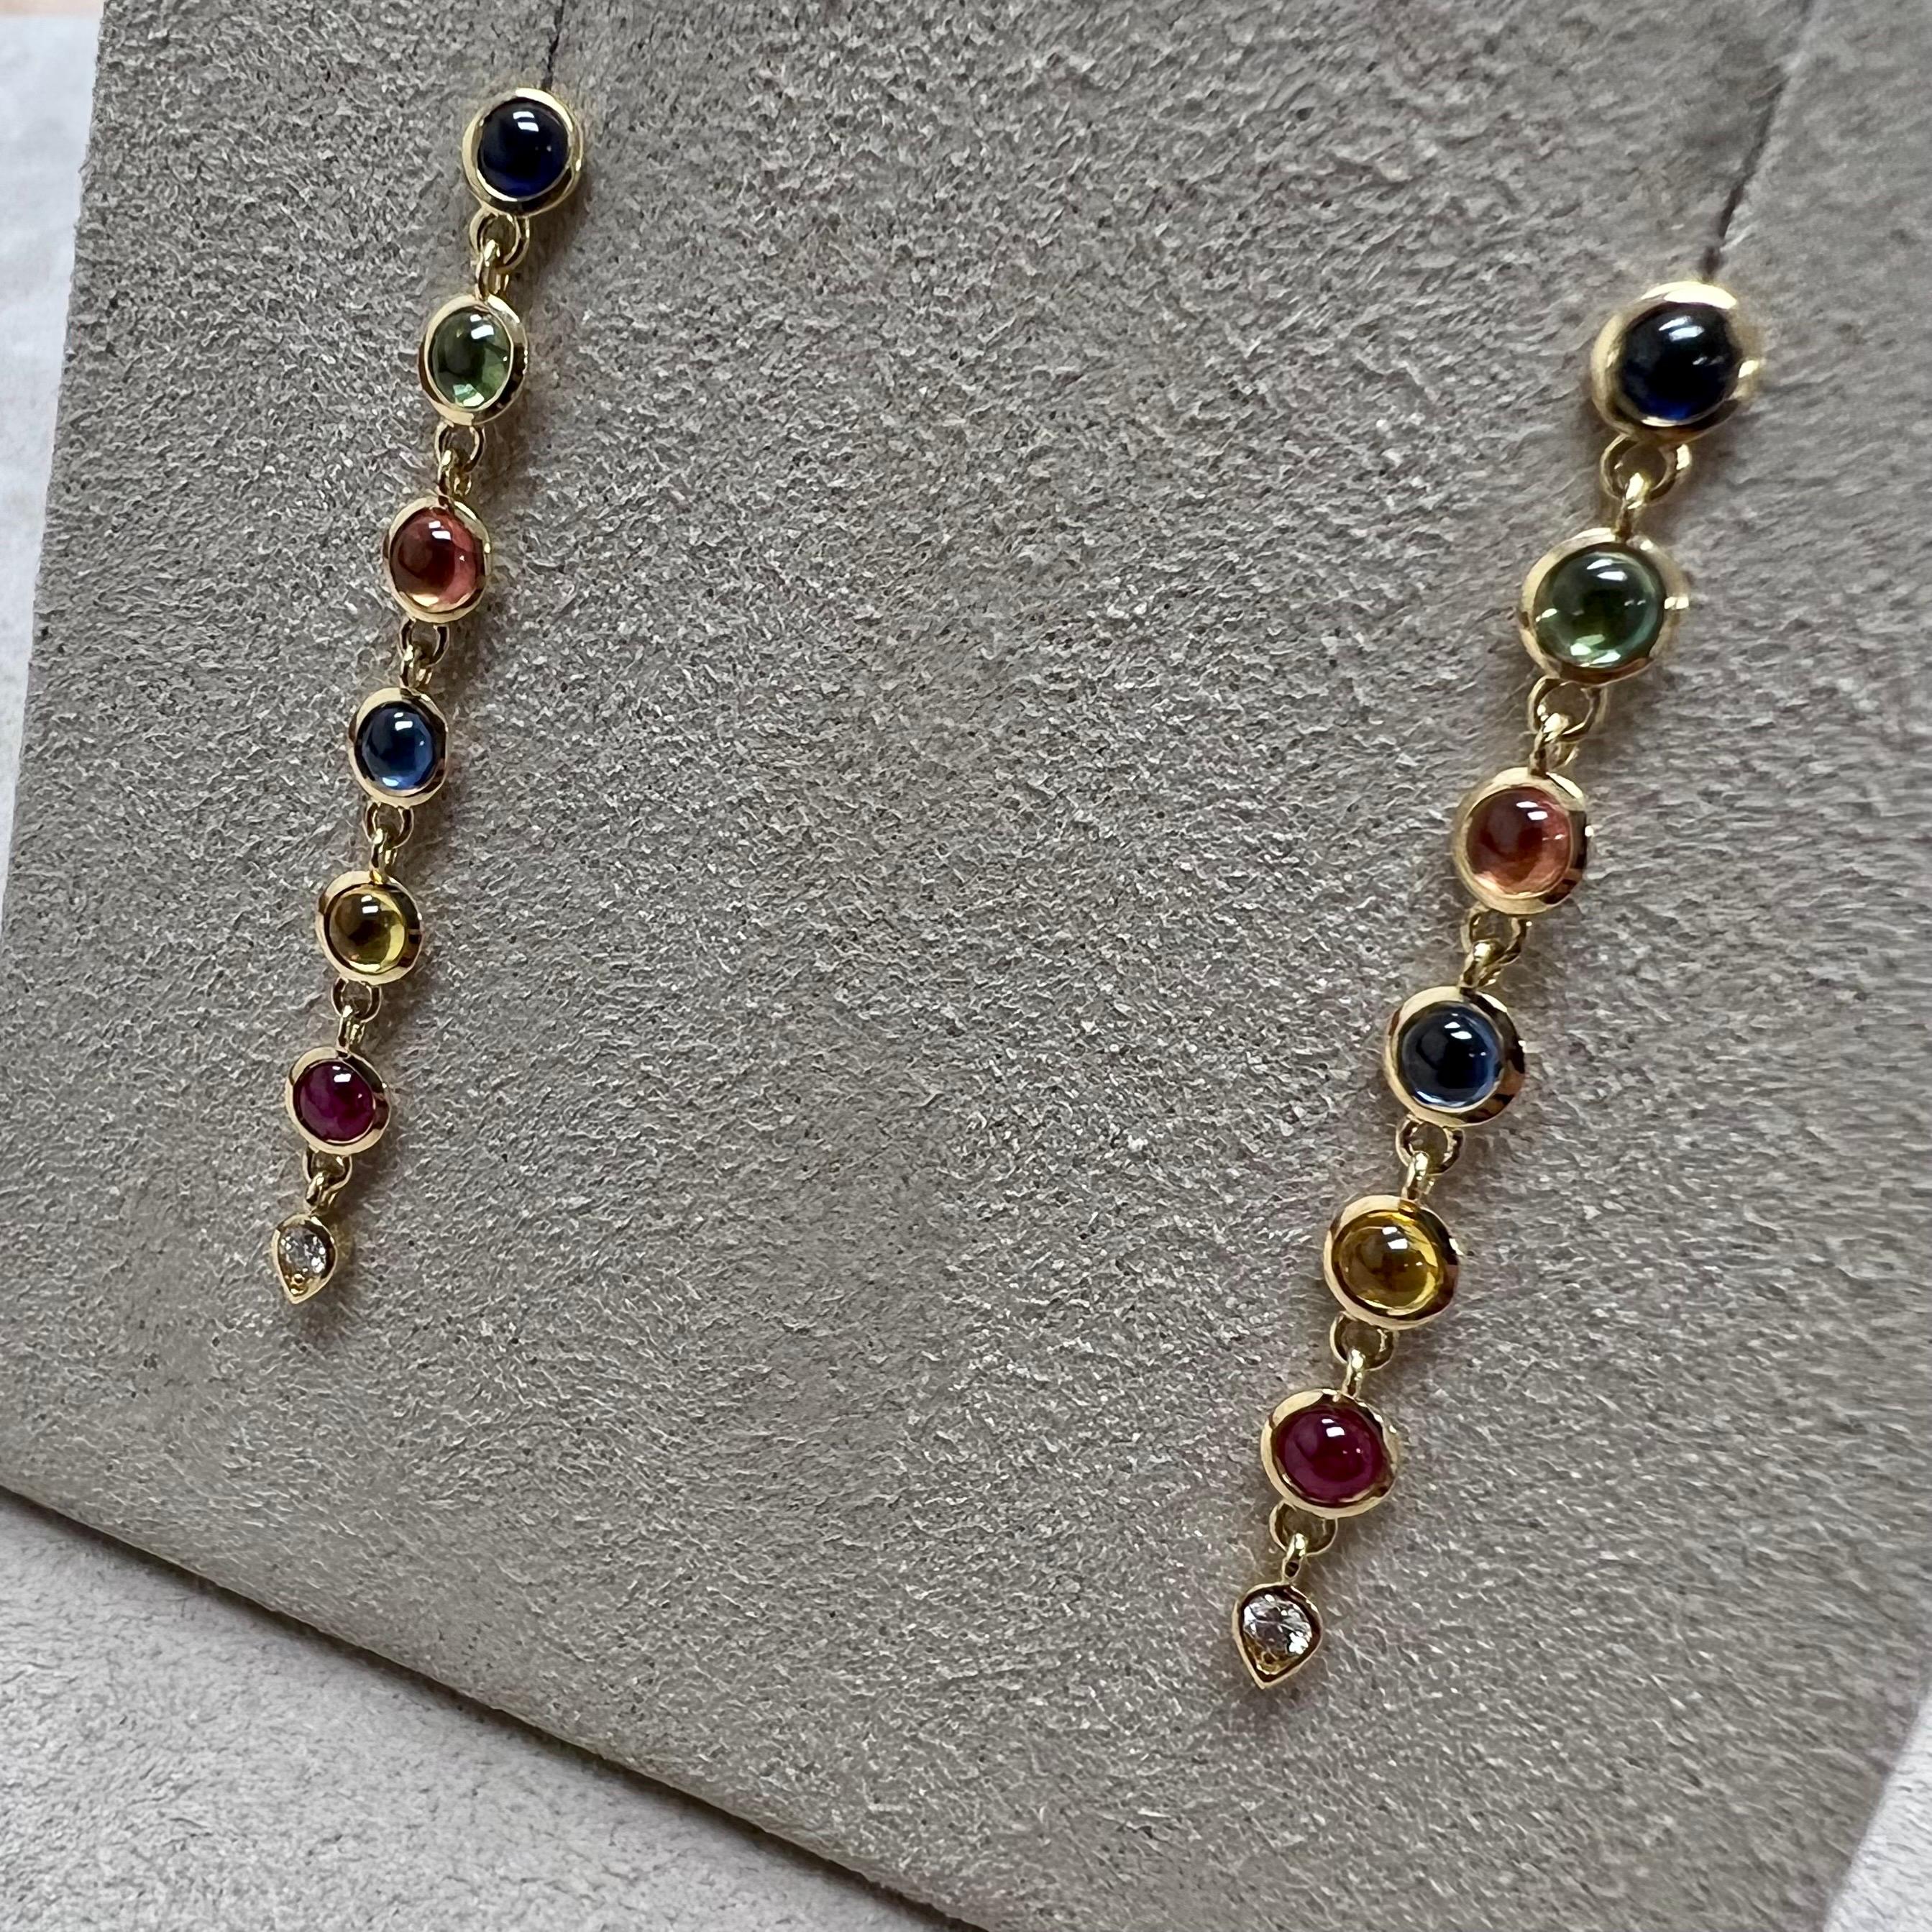 Created in 18 karat yellow gold
Multi color sapphires 1.80 carats approx.
Diamonds 0.07 carat approx.
Post backs for pierced ears
Limited edition

This limited edition Chakra Long Necklace is an exquisite piece of luxury jewelry crafted from 18